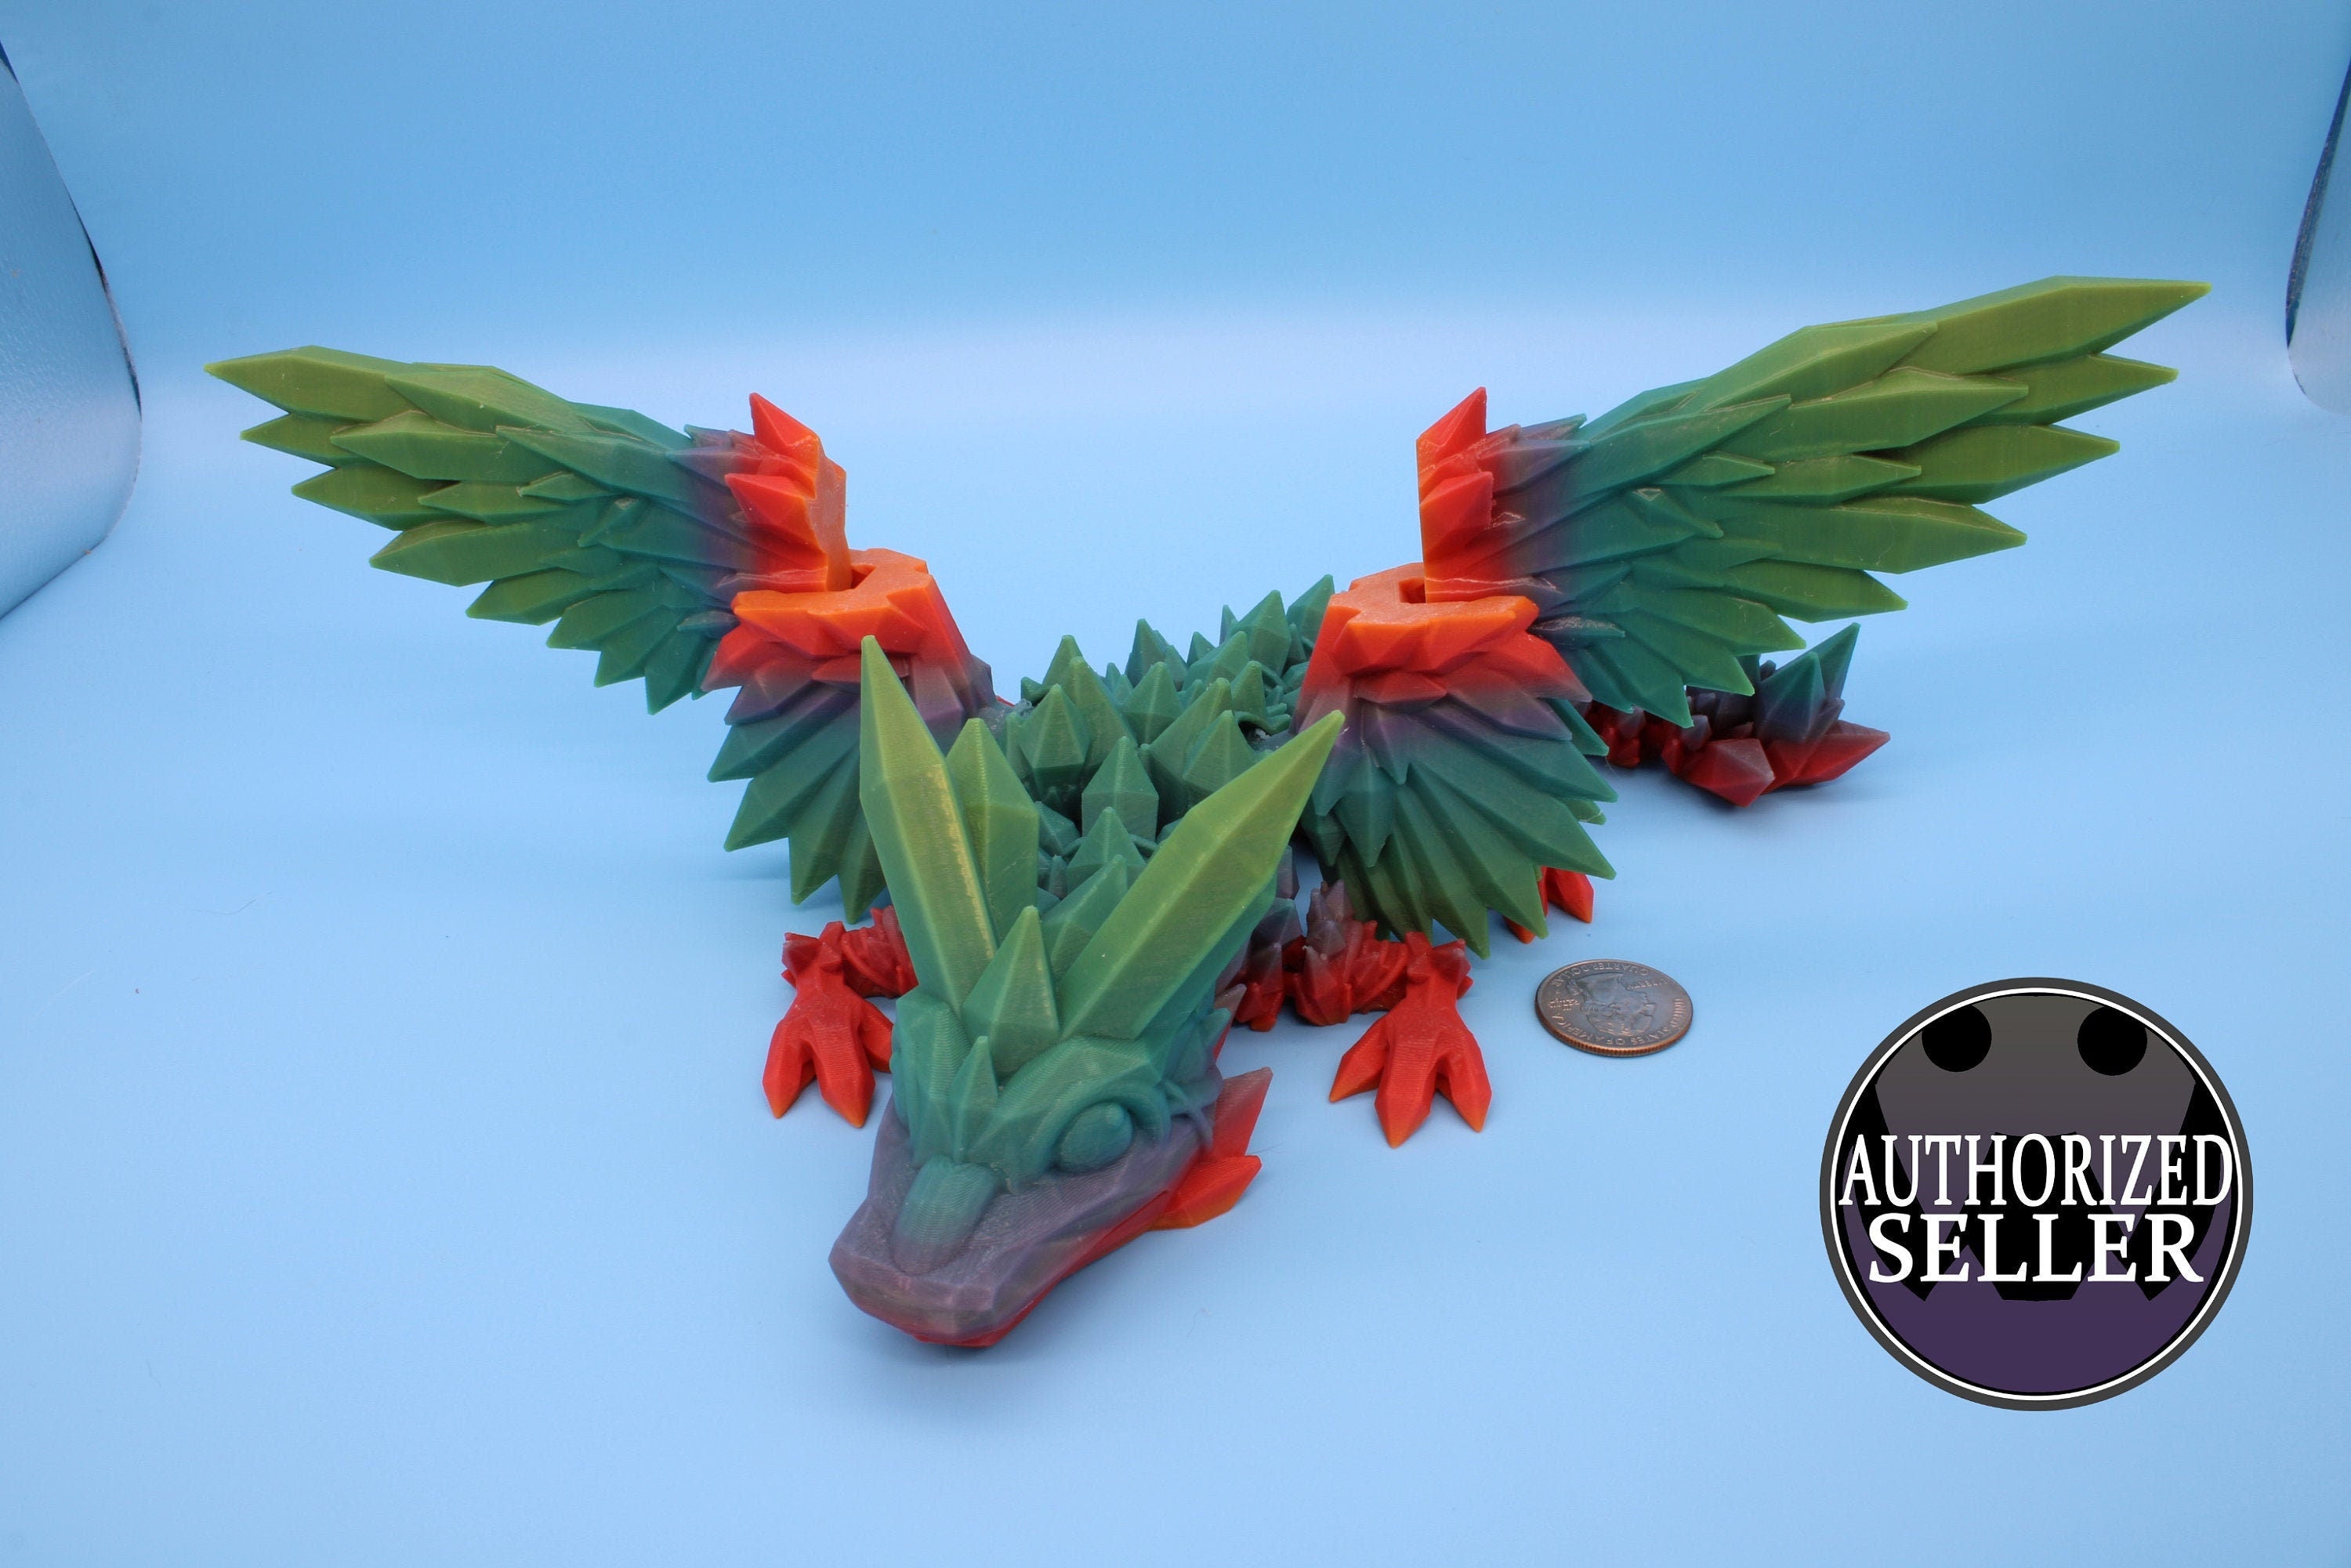 Baby Rainbow Crystal Winged Dragon. 3D printed articulating dragon Fidget, Flexi, Toy 11.5 in. Stress Relief, Gift. flexi Toy